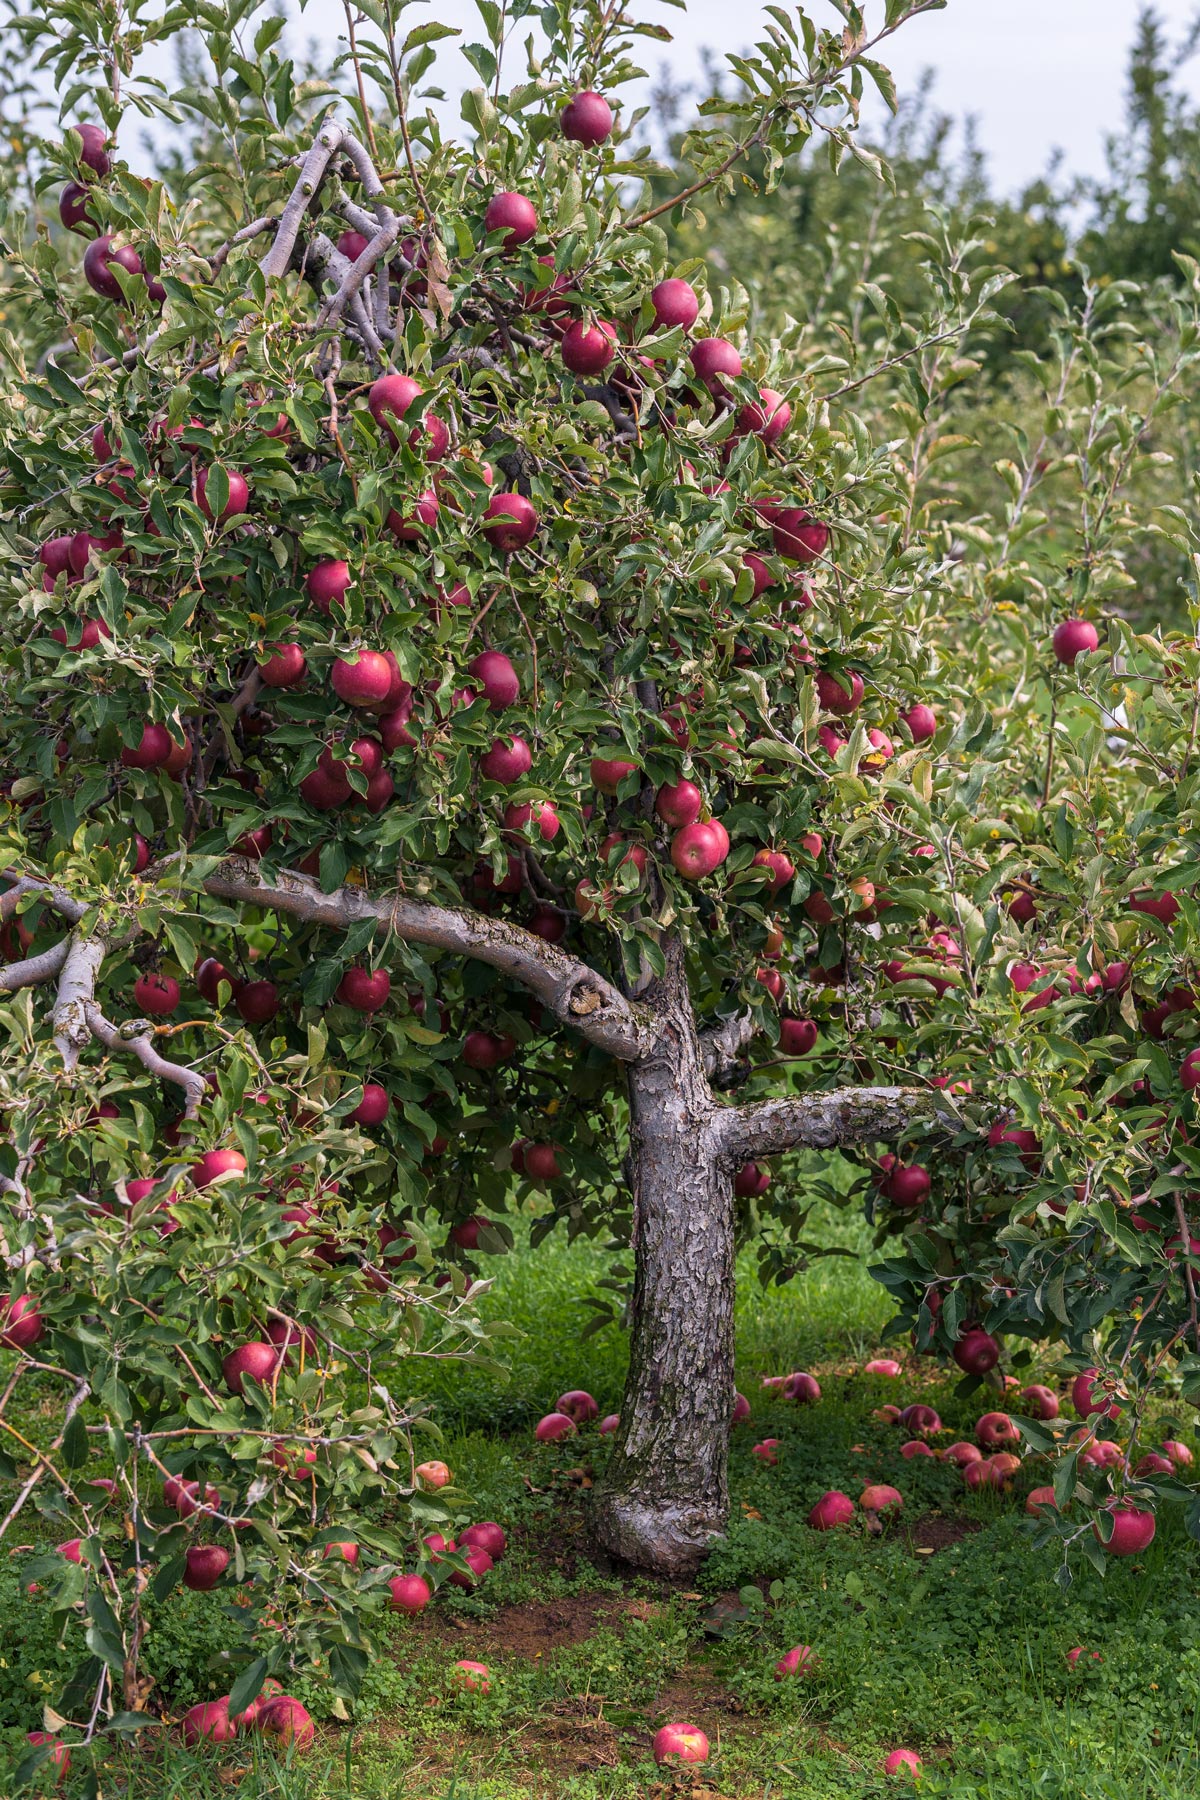 Low-Chill Pink Lady Apple Trees for Sale